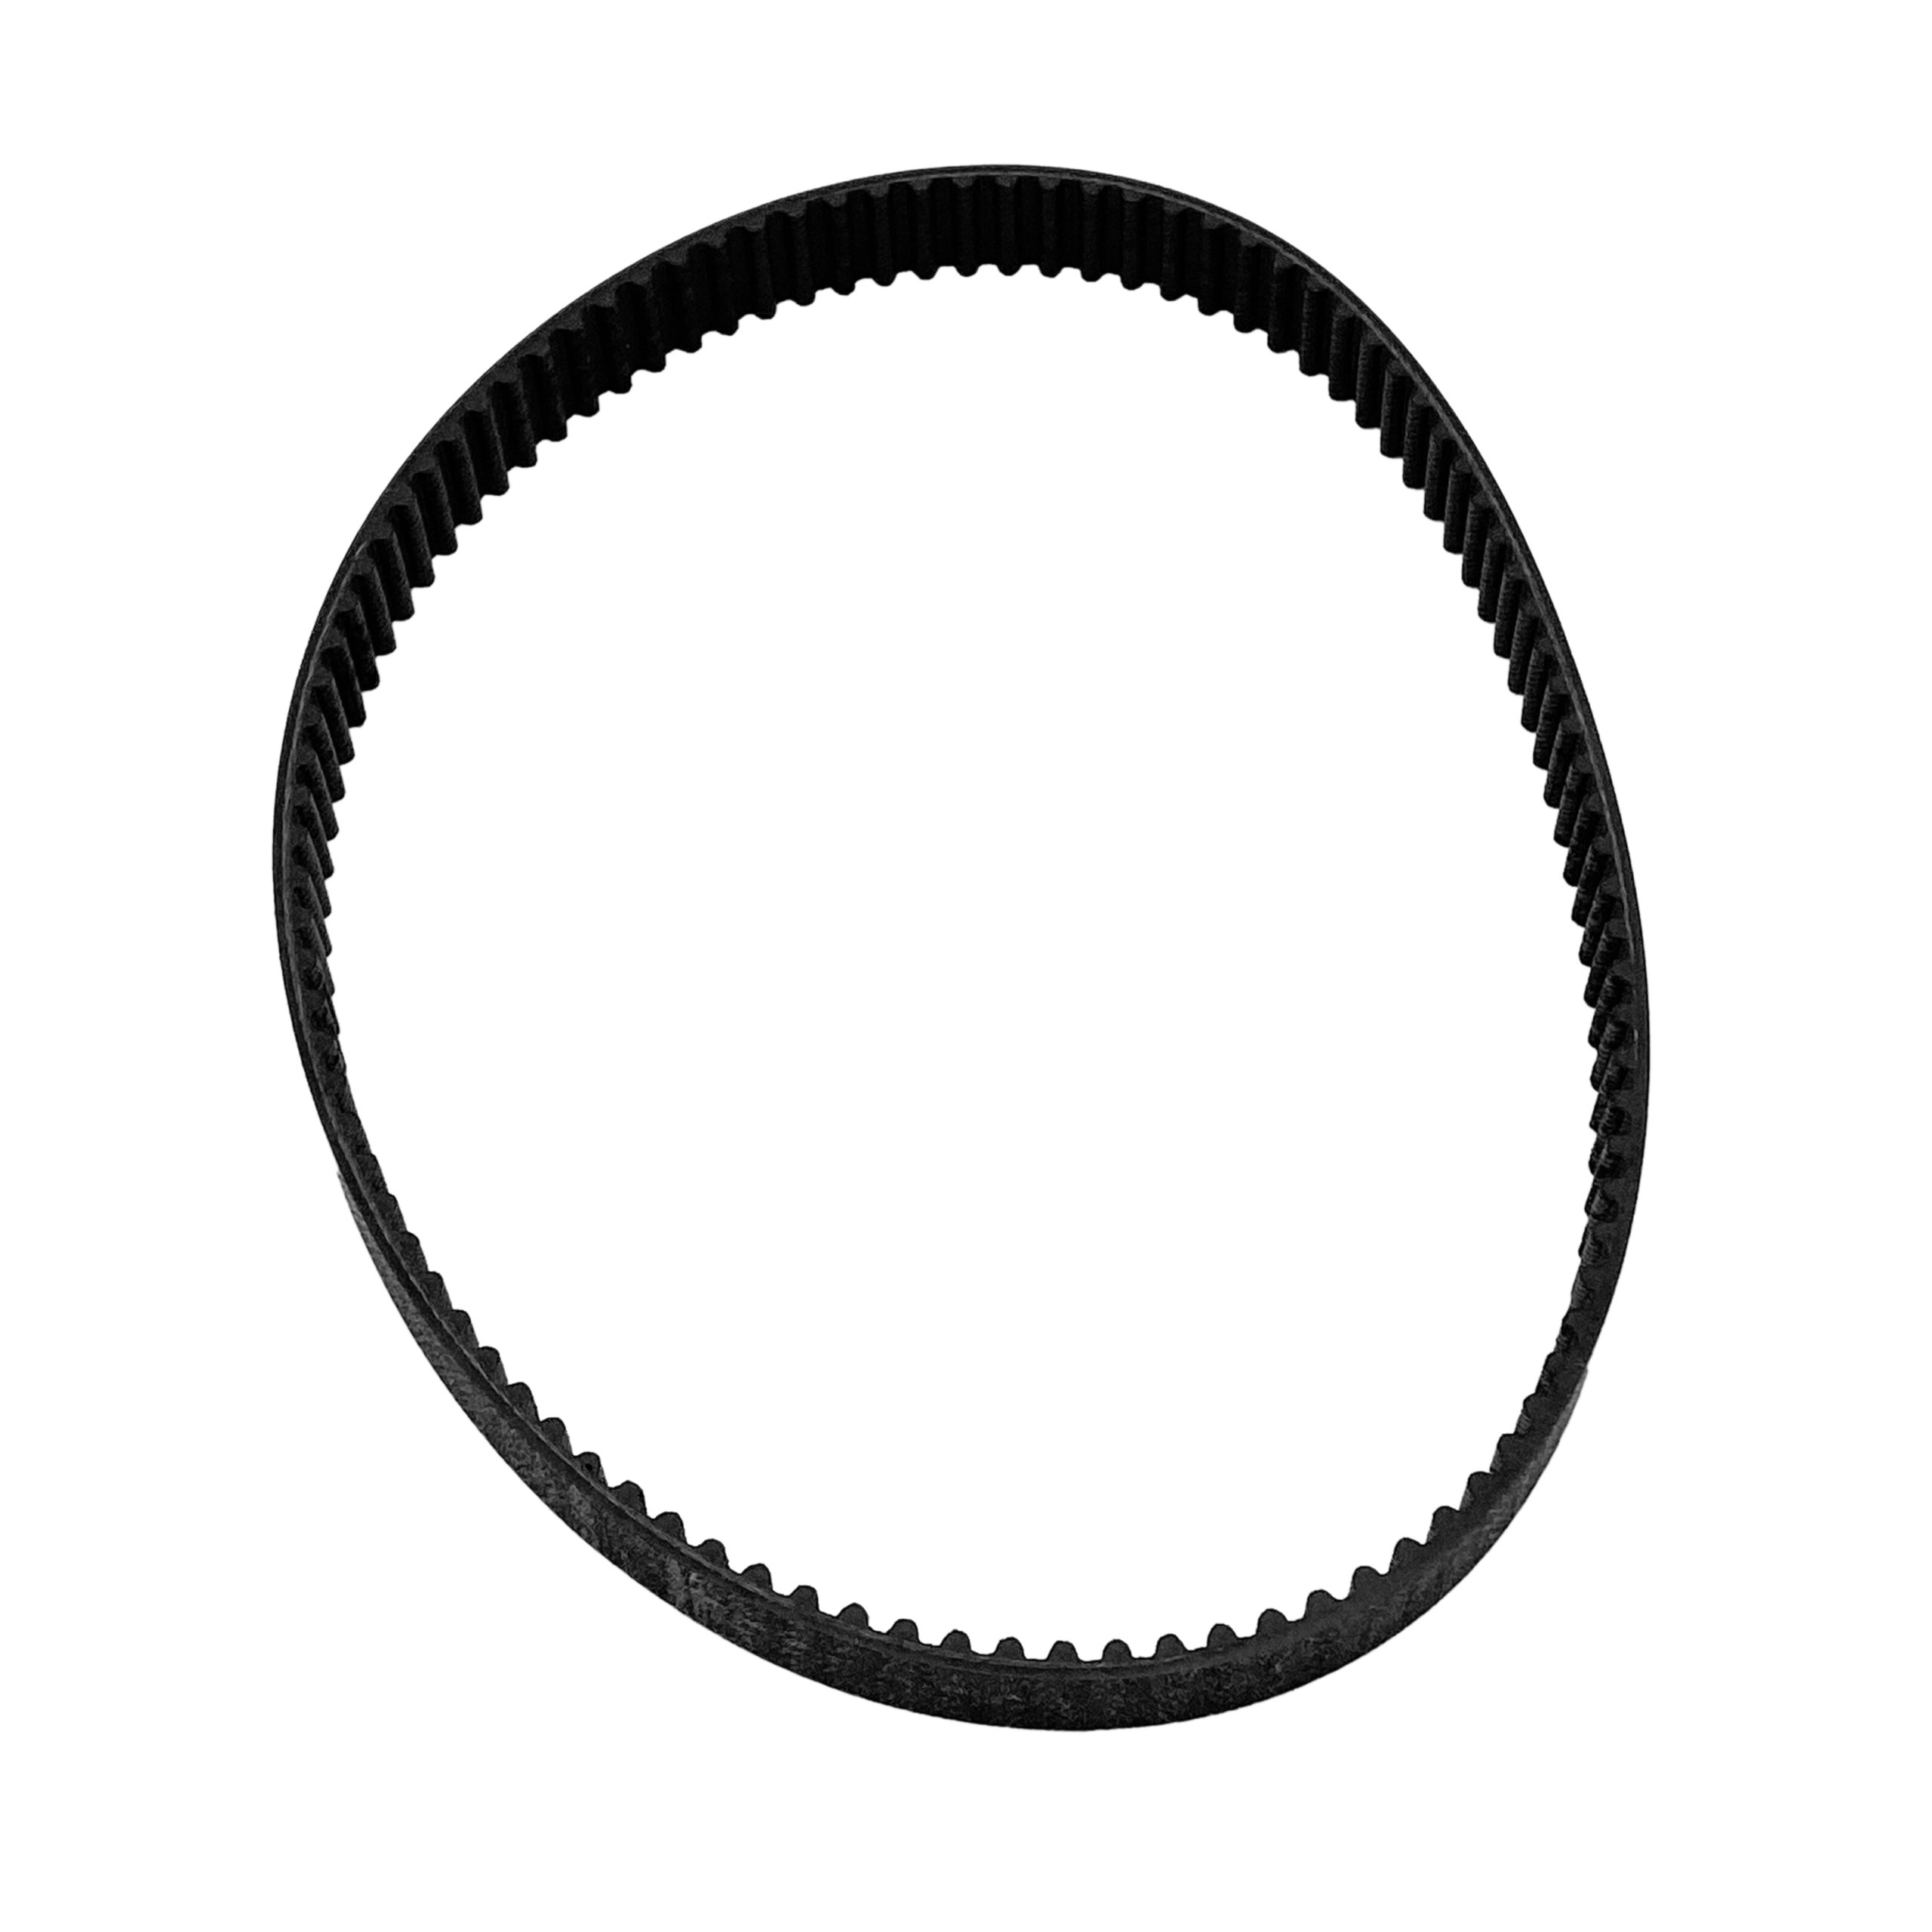 Haas HRT 210 Drive Belt Replace the drive belt on your HRT 210 with this belt.